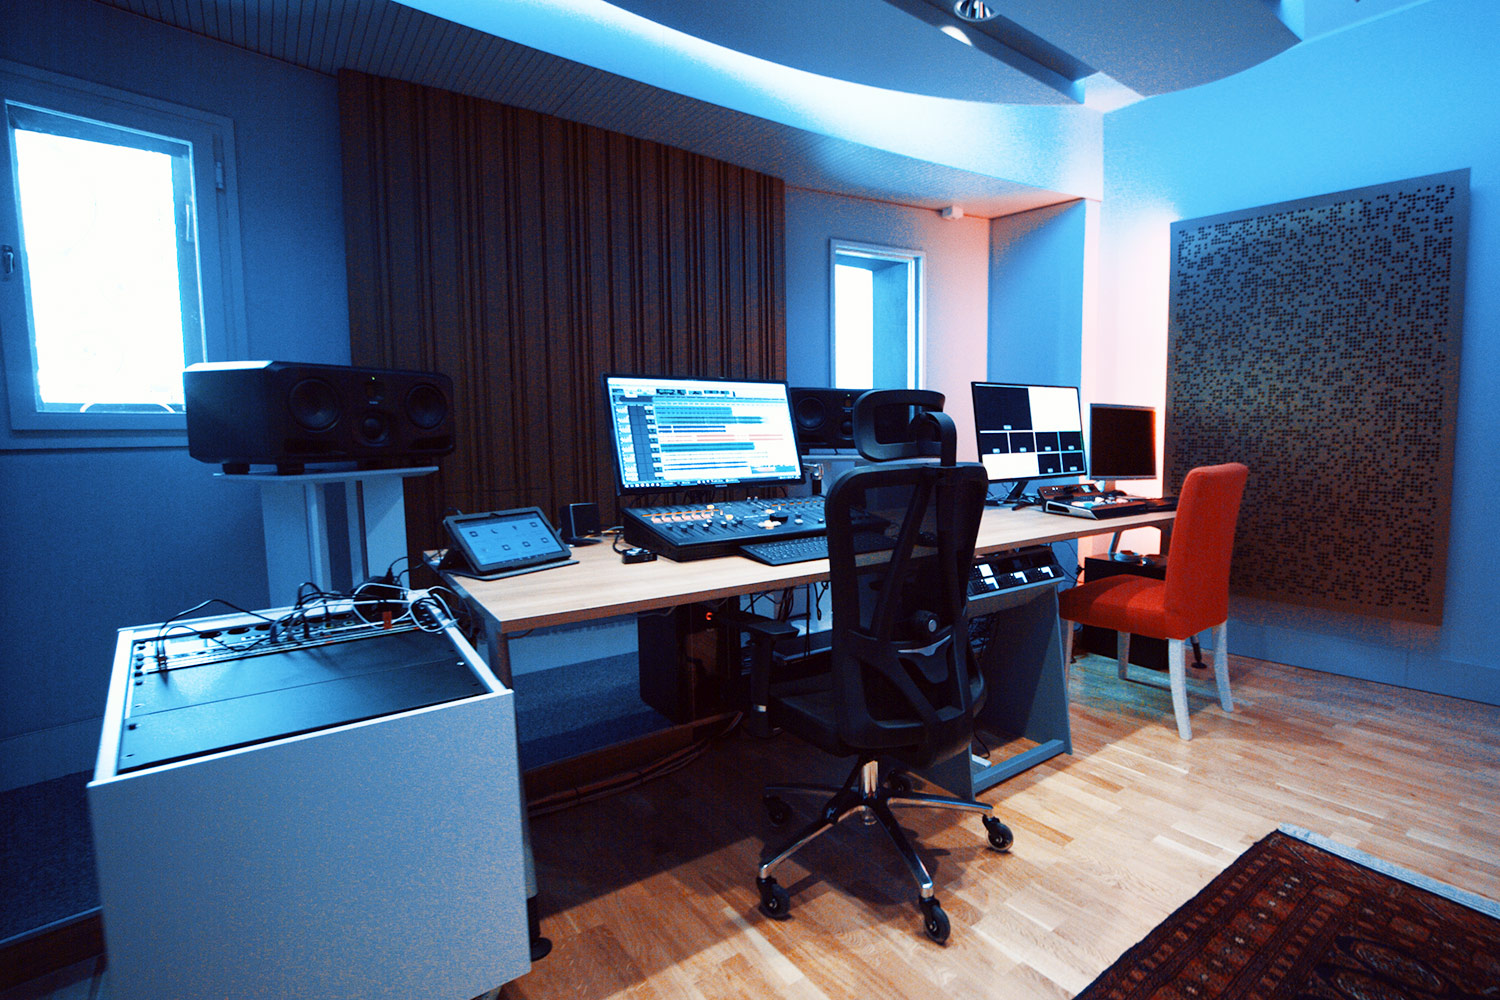 Vienna City Sound is a twelve-room recording studio built in the basement of a vintage commercial building in the heart of Vienna. Owner Peter Zimmerl’s retained the services of WSDG to design his dream studio. Control room smaller.